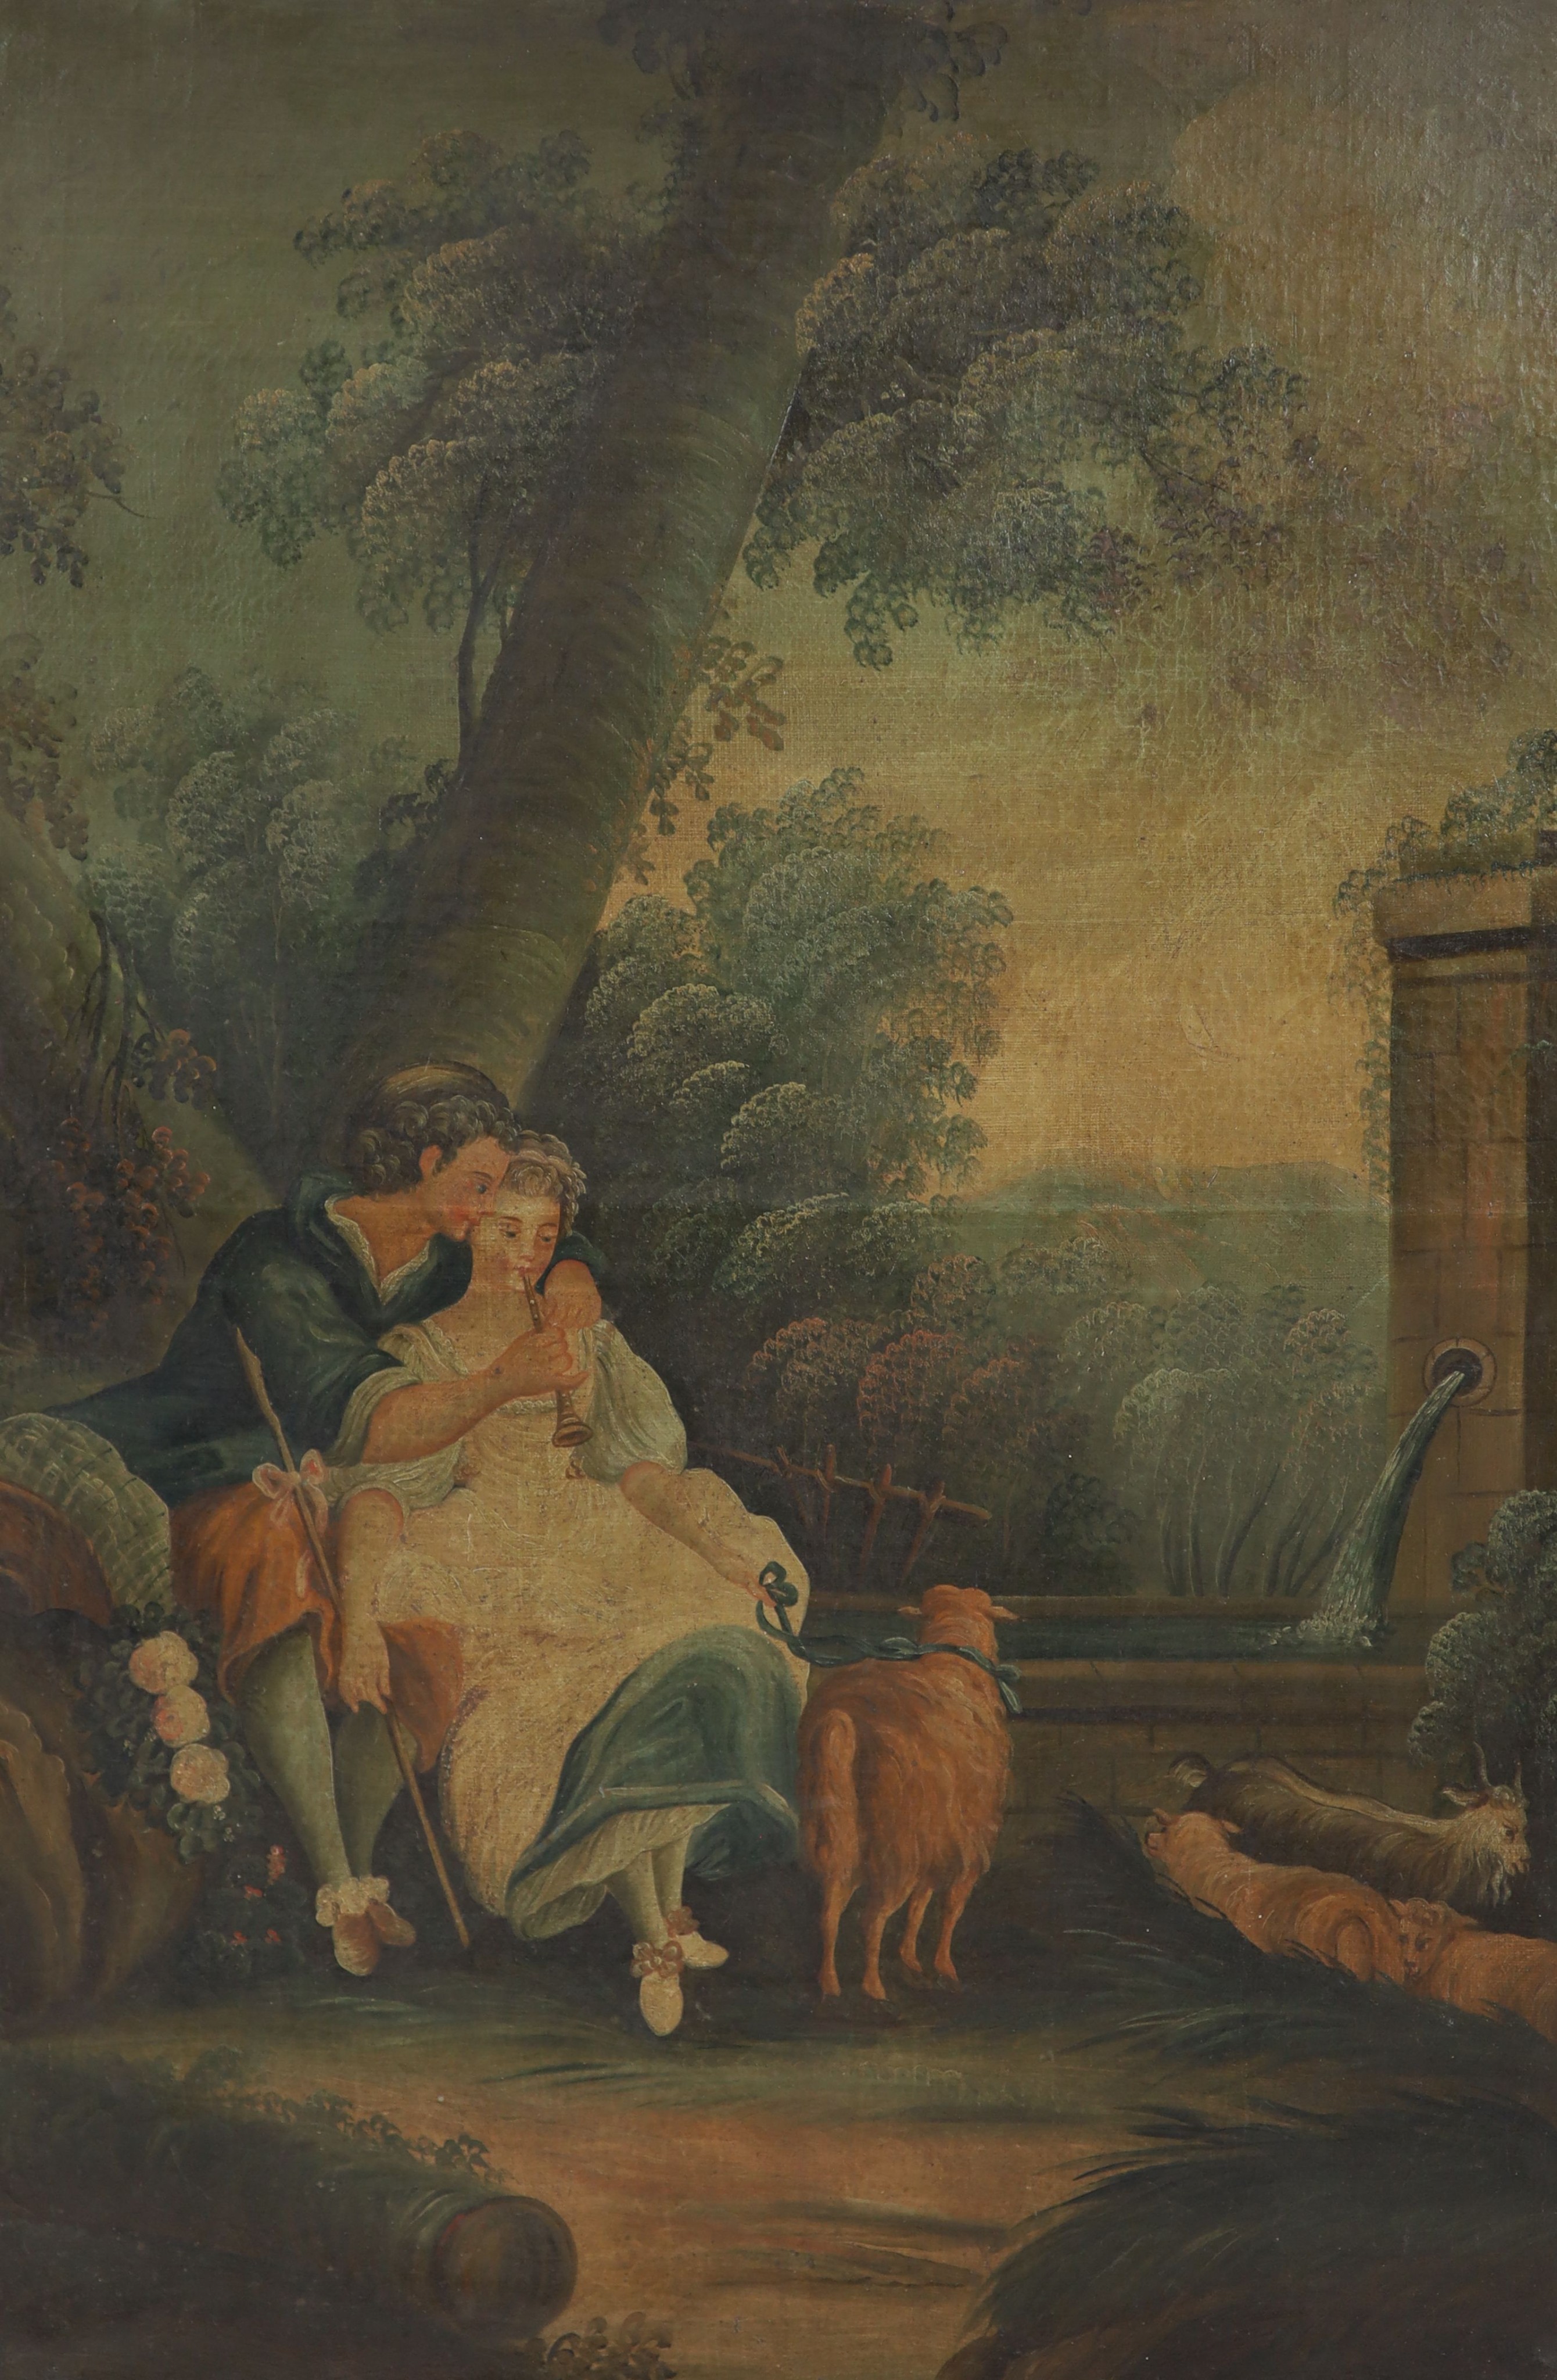 Late 19th century French School, Pastoral lovers, Oil on canvas, 100 x 67cm. Overall 156 x 72cm.